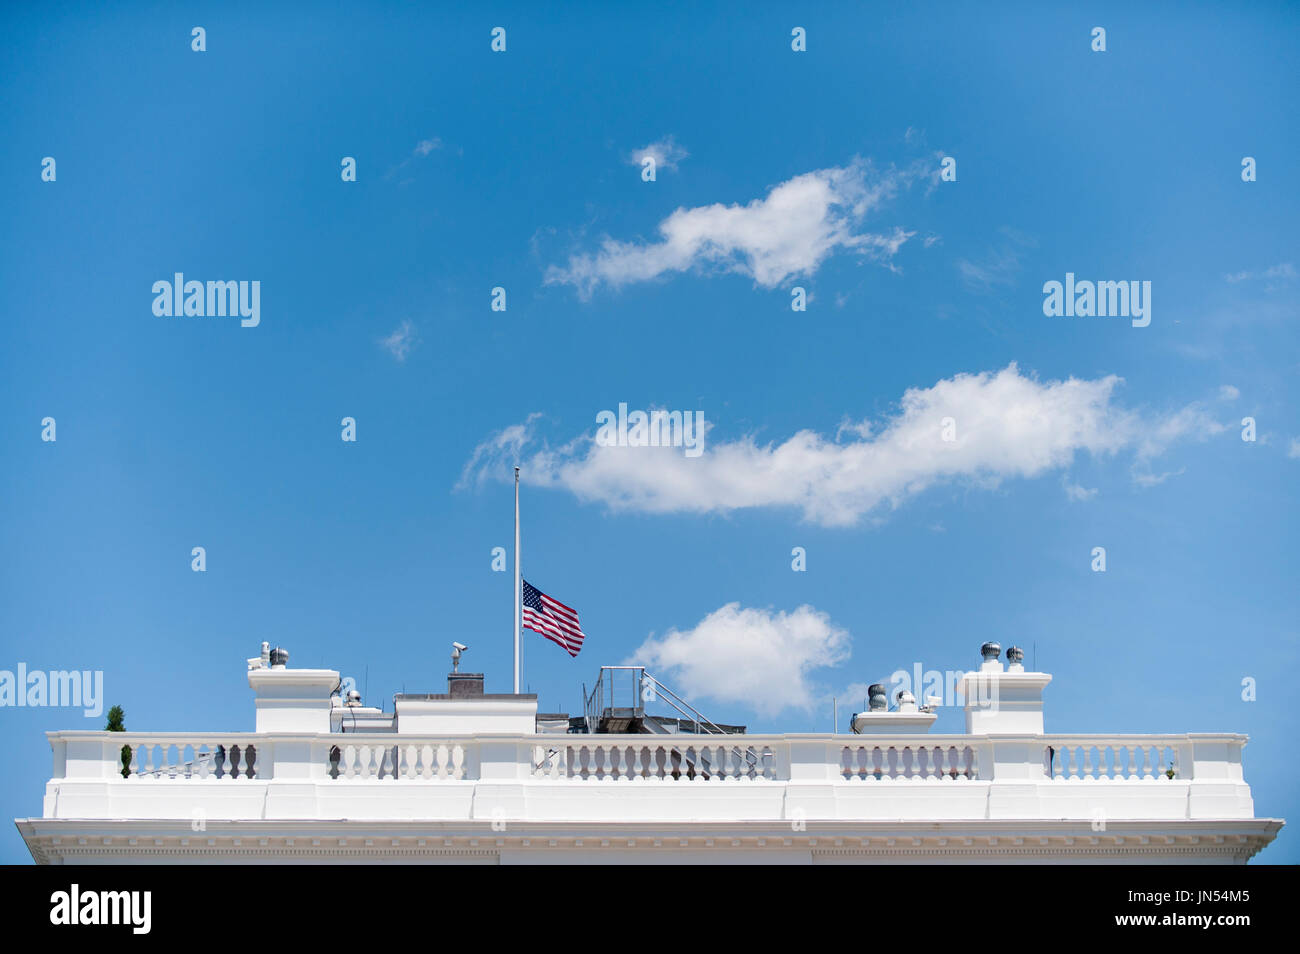 The American flags that fly over the White House in Washington, DC are lowered to half staff following United States President Barack Obama's remarks to reporters in the Brady Press Briefing Room in Washington, District of Columbia, U.S., on Sunday, June 12, 2016, about the deadly shooting the night before in a gay nightclub in Orlando FL. Approximately 50 people were killed and at least 53 more were injured in what appears to be the deadliest mass shooting in U.S. history.  Credit: Pete Marovich / Pool via CNP Stock Photo